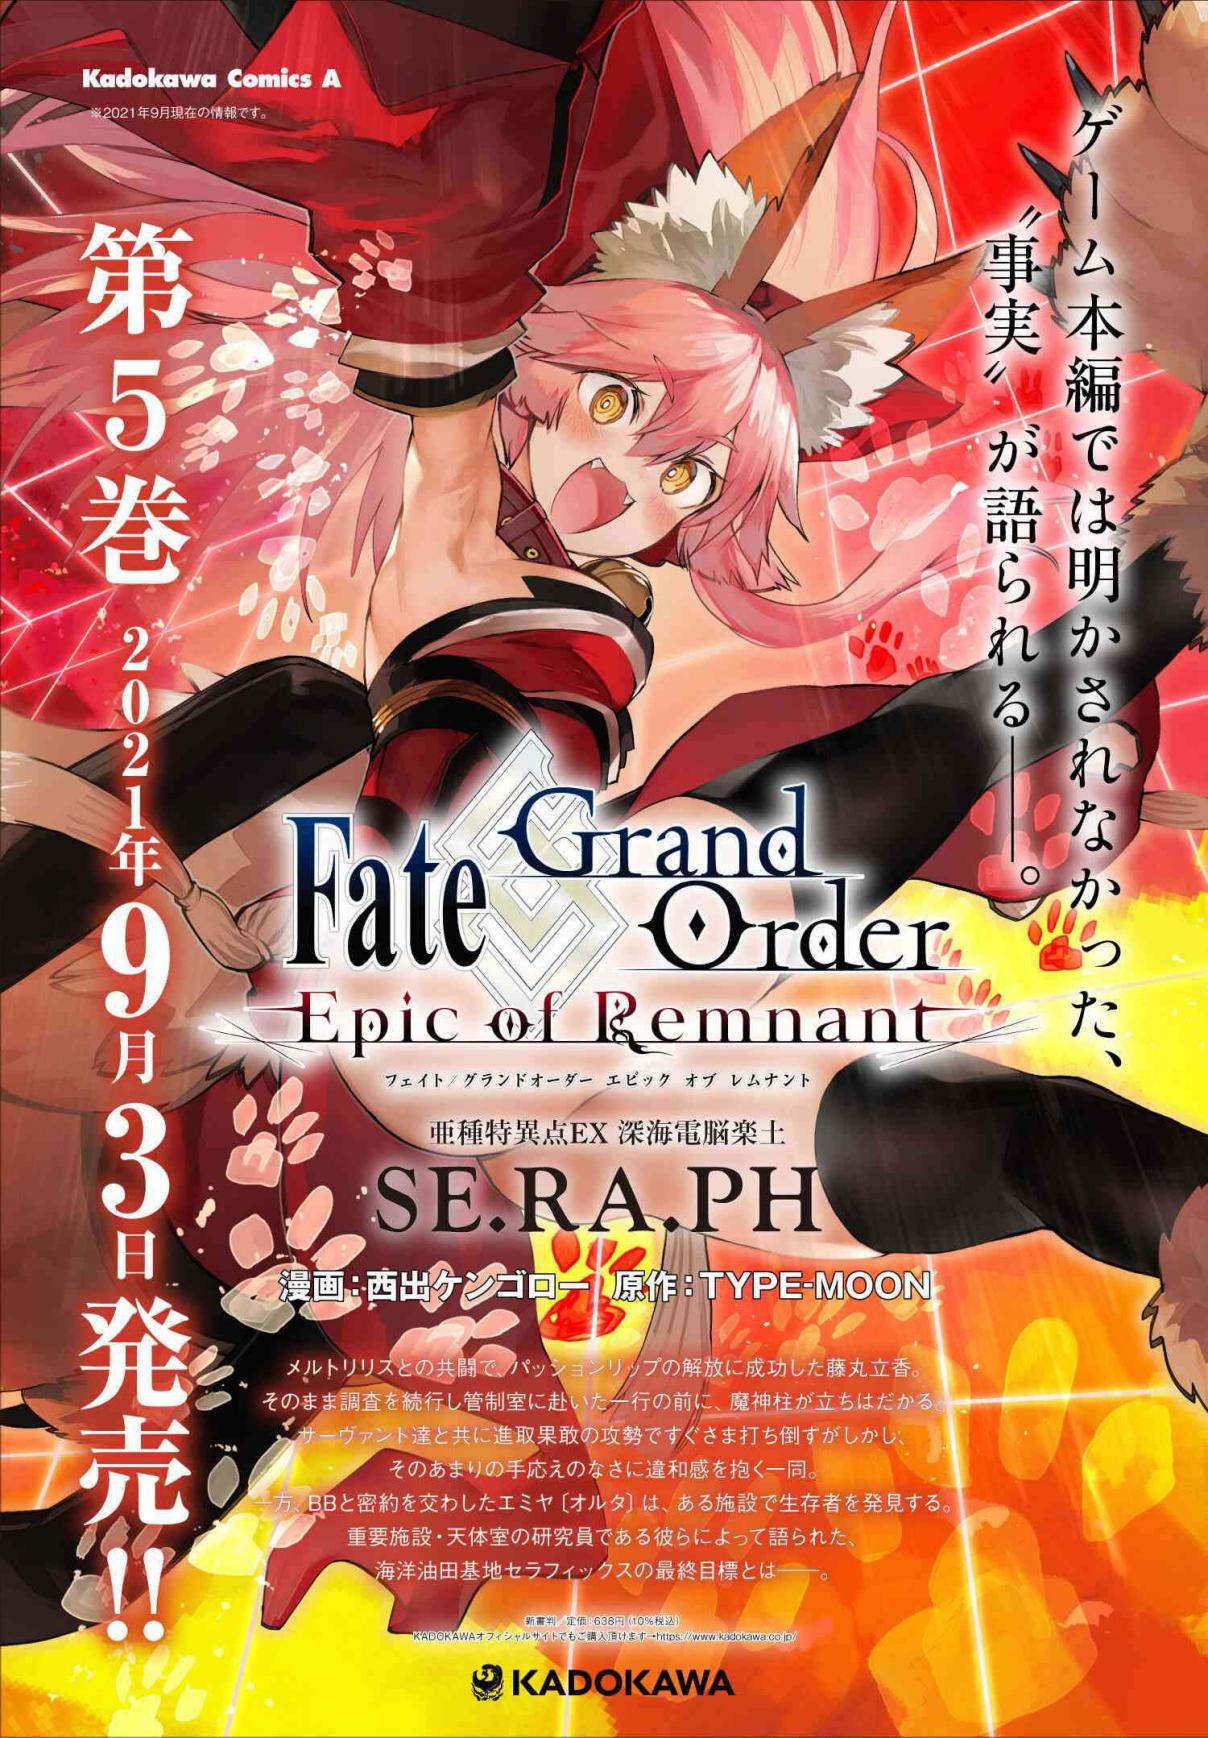 Fate/Grand Order: Epic of Remnant - Deep Sea Cyber-Paradise SE.RA.PH 24.2